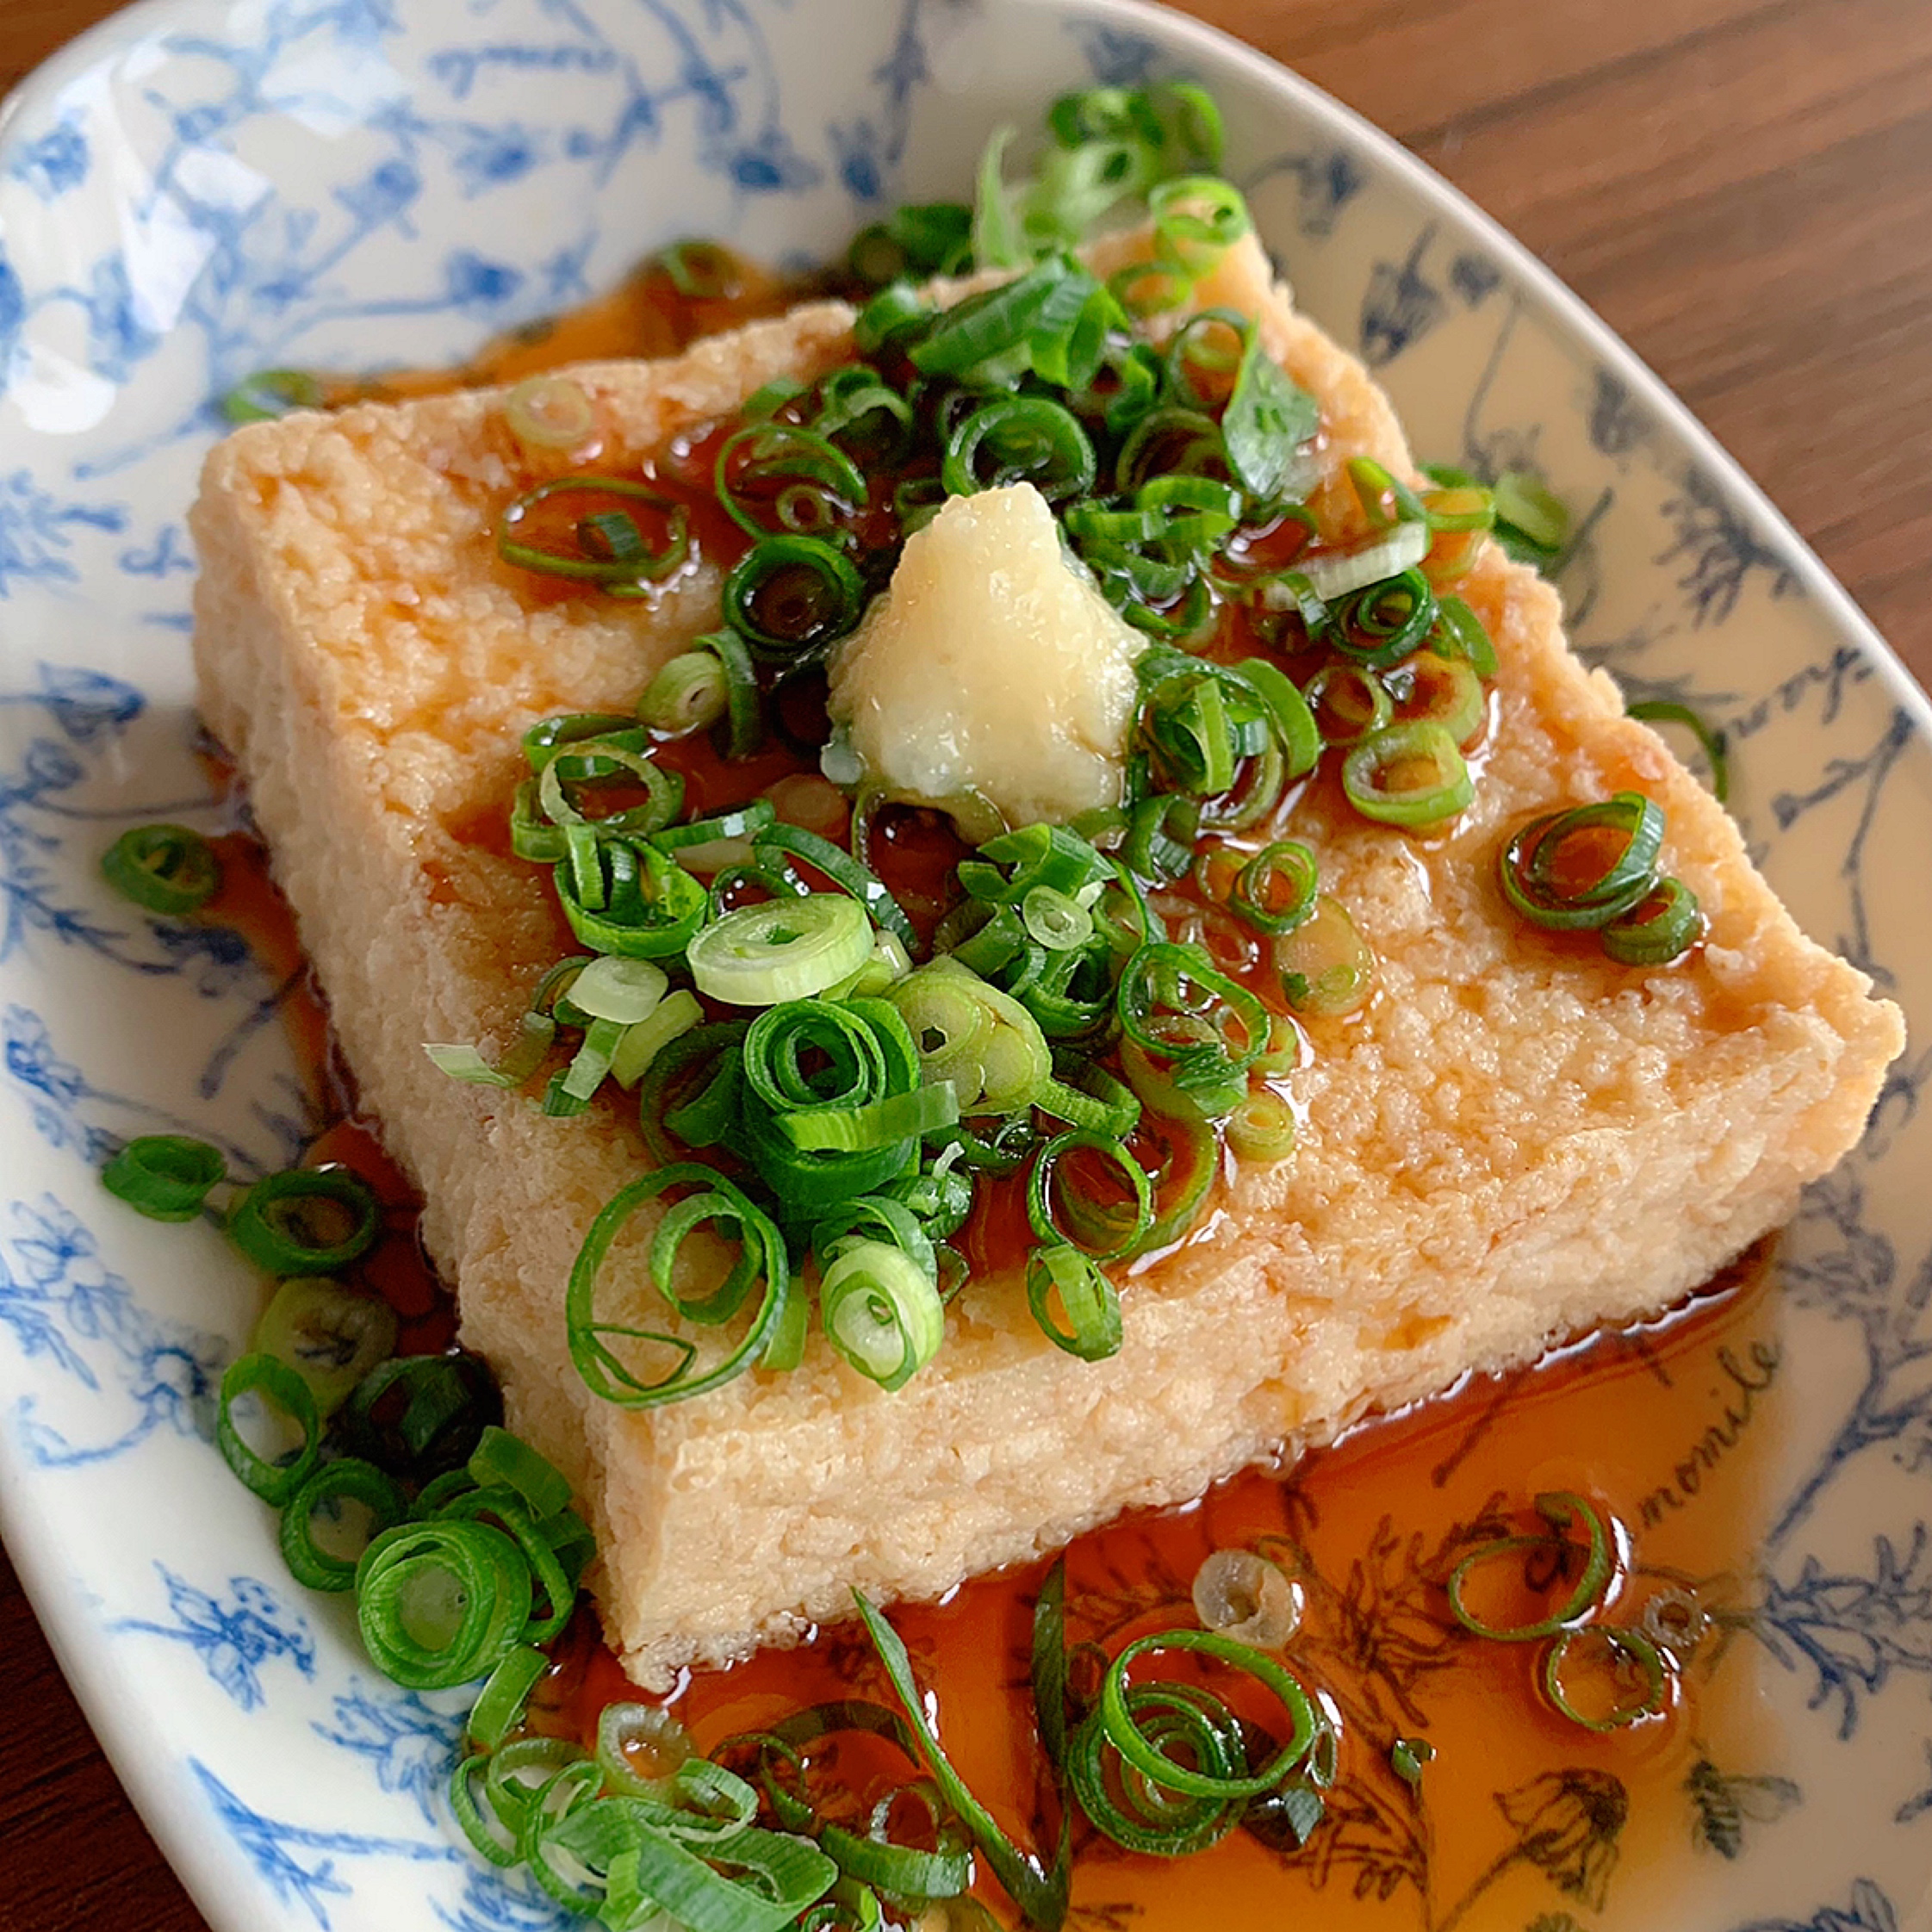 This dish is deep fried tofu (atsuage) heated in a microwave and topped with ginger and ponzu sauce.